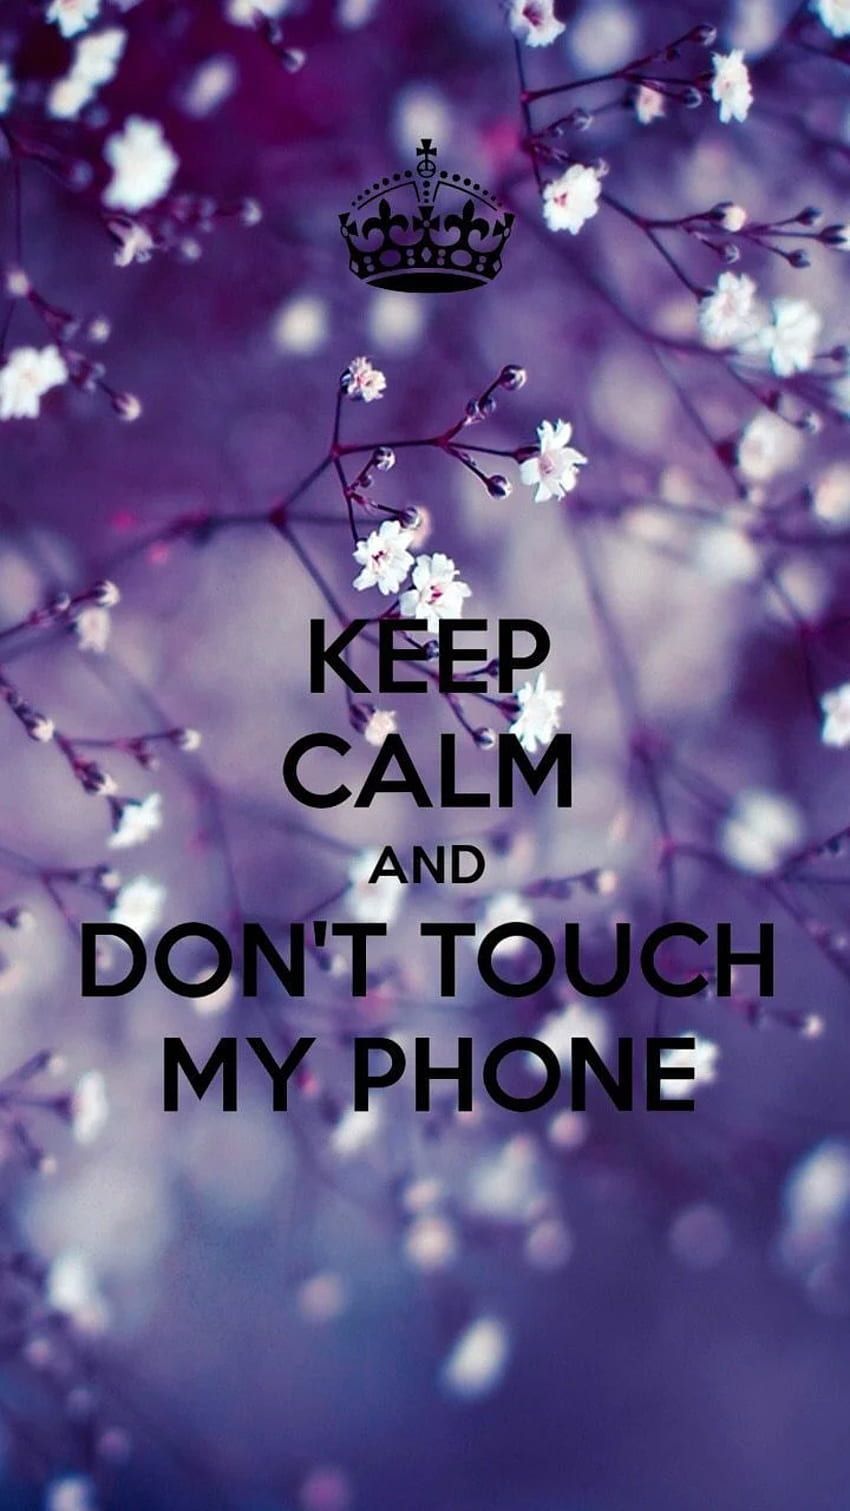 Phone & Celular : Keep calm and DON'T TOUCH MY PHONE HD phone wallpaper